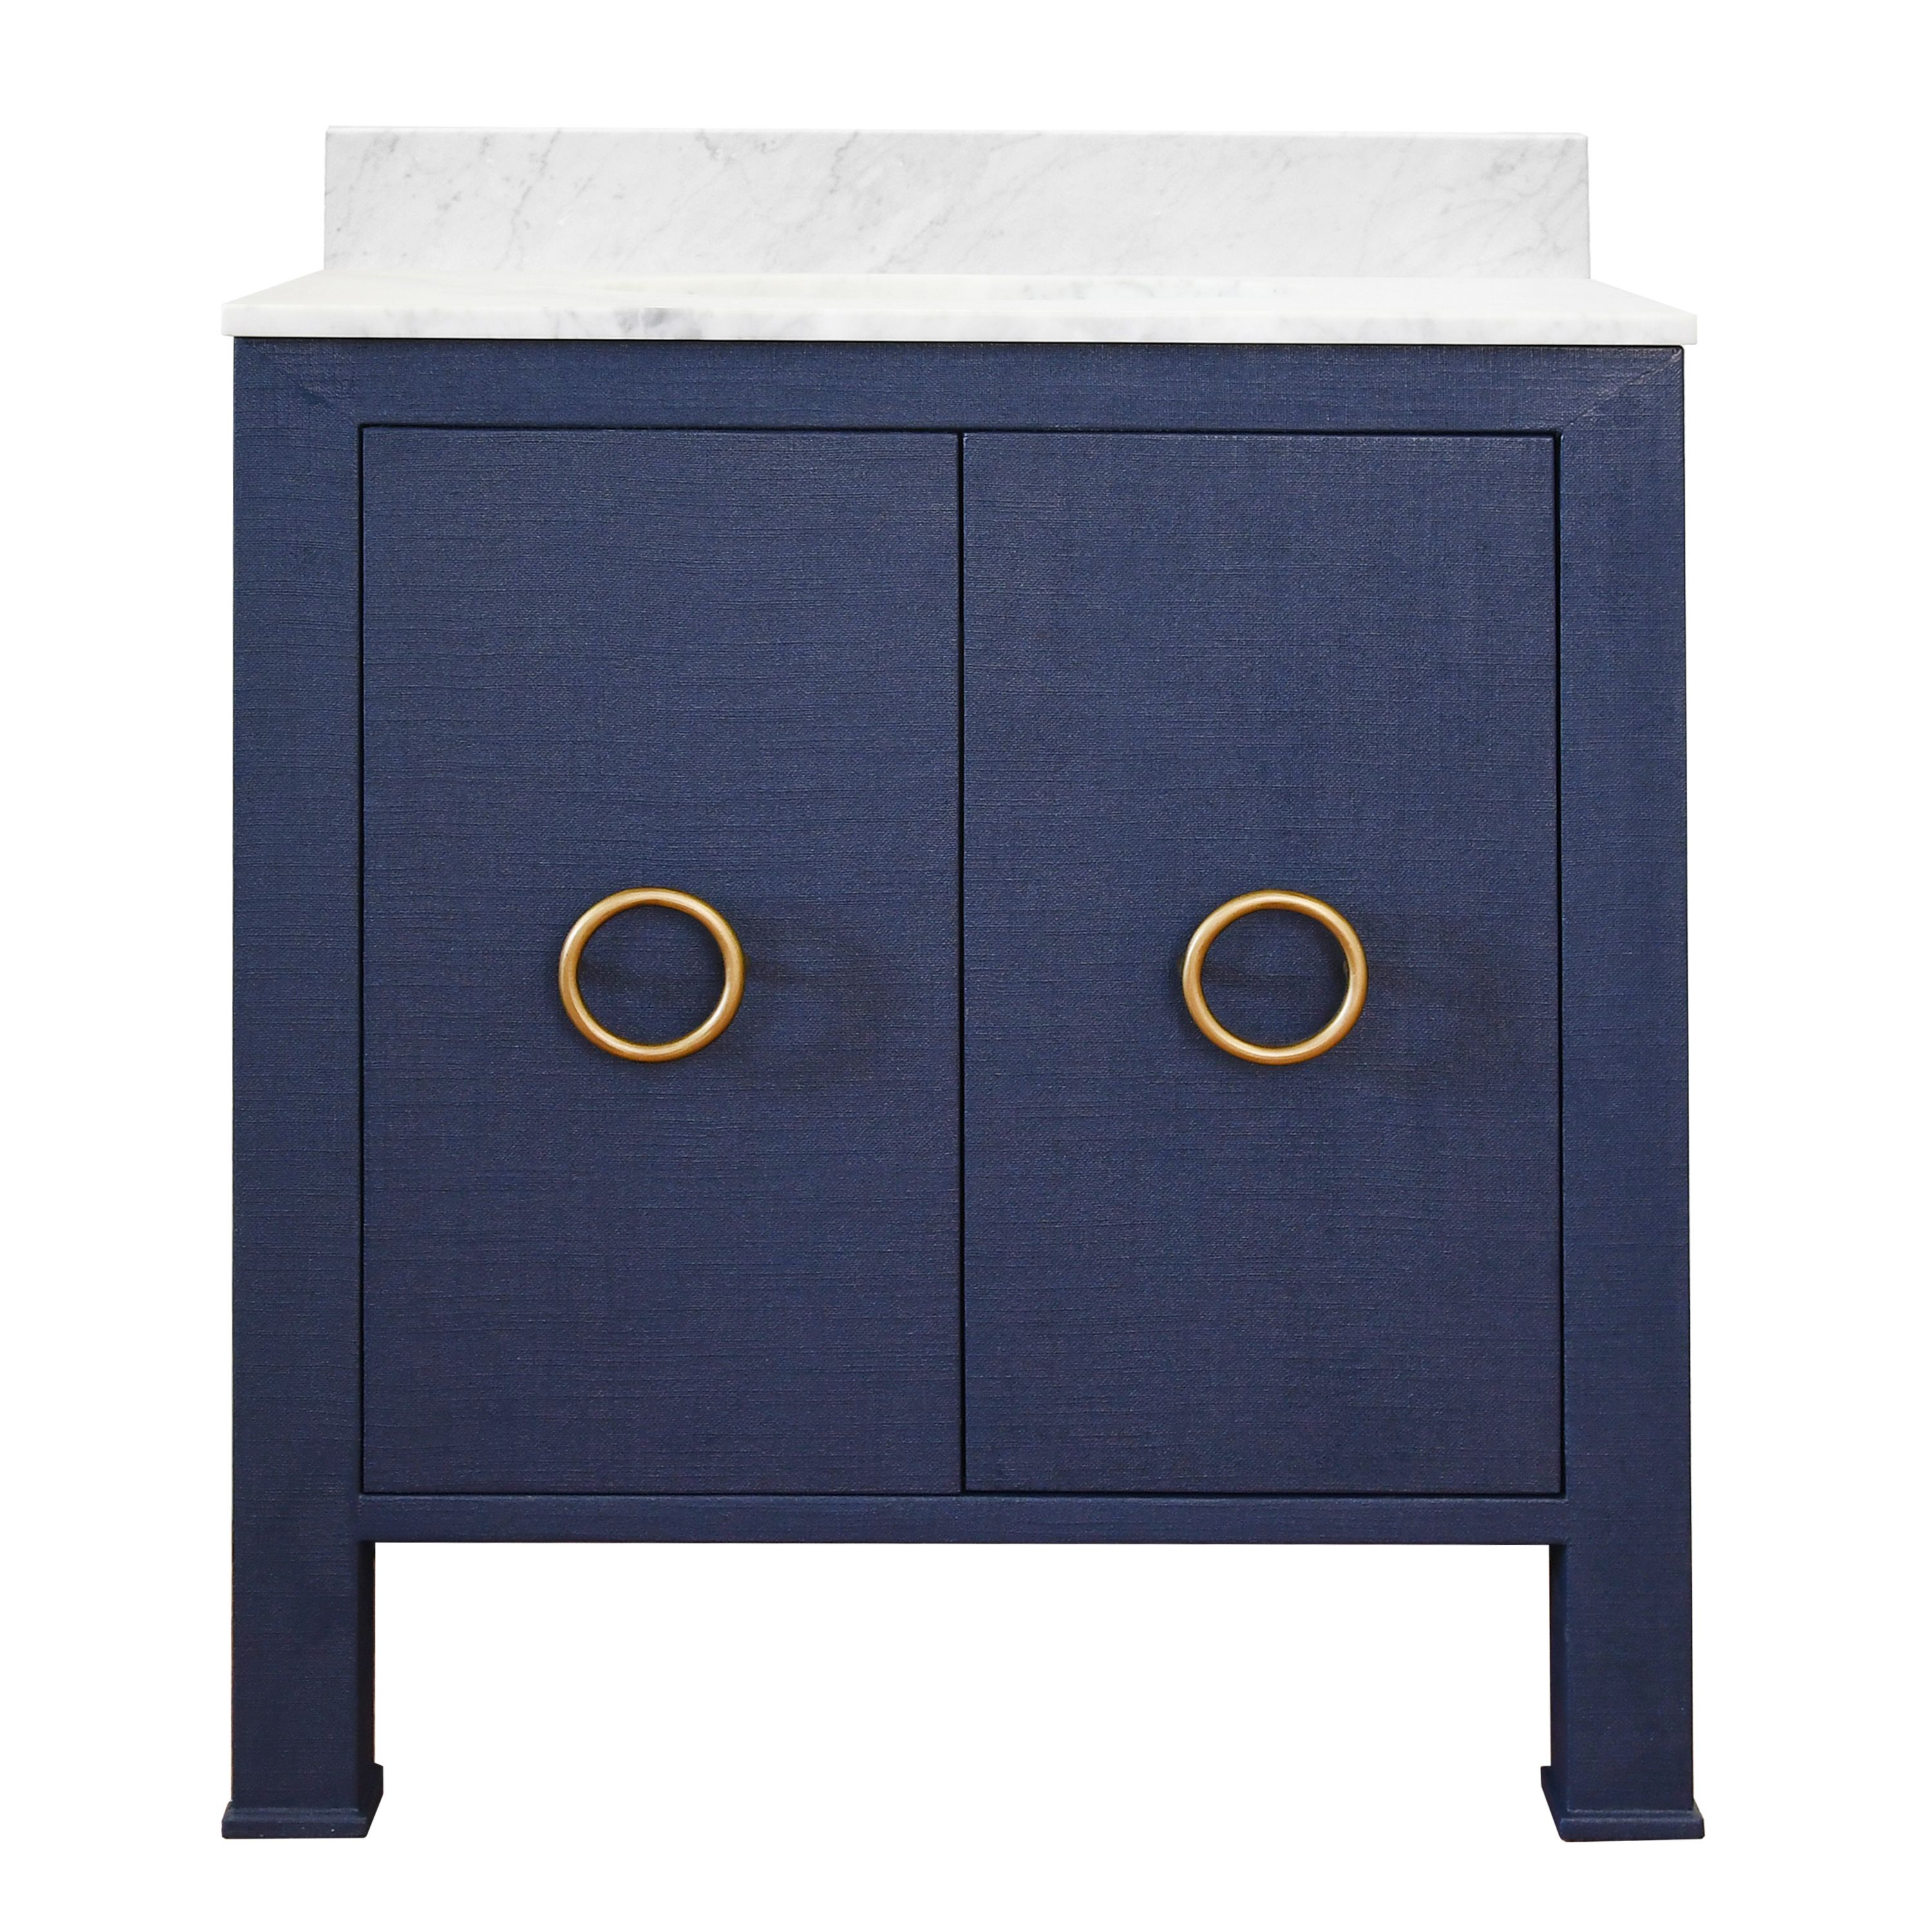 30" Issac Edwards Collection Bath Vanity in Textured Navy Linen w/ Antique Brass Hardware, White Marble Top and Porcelain Sink